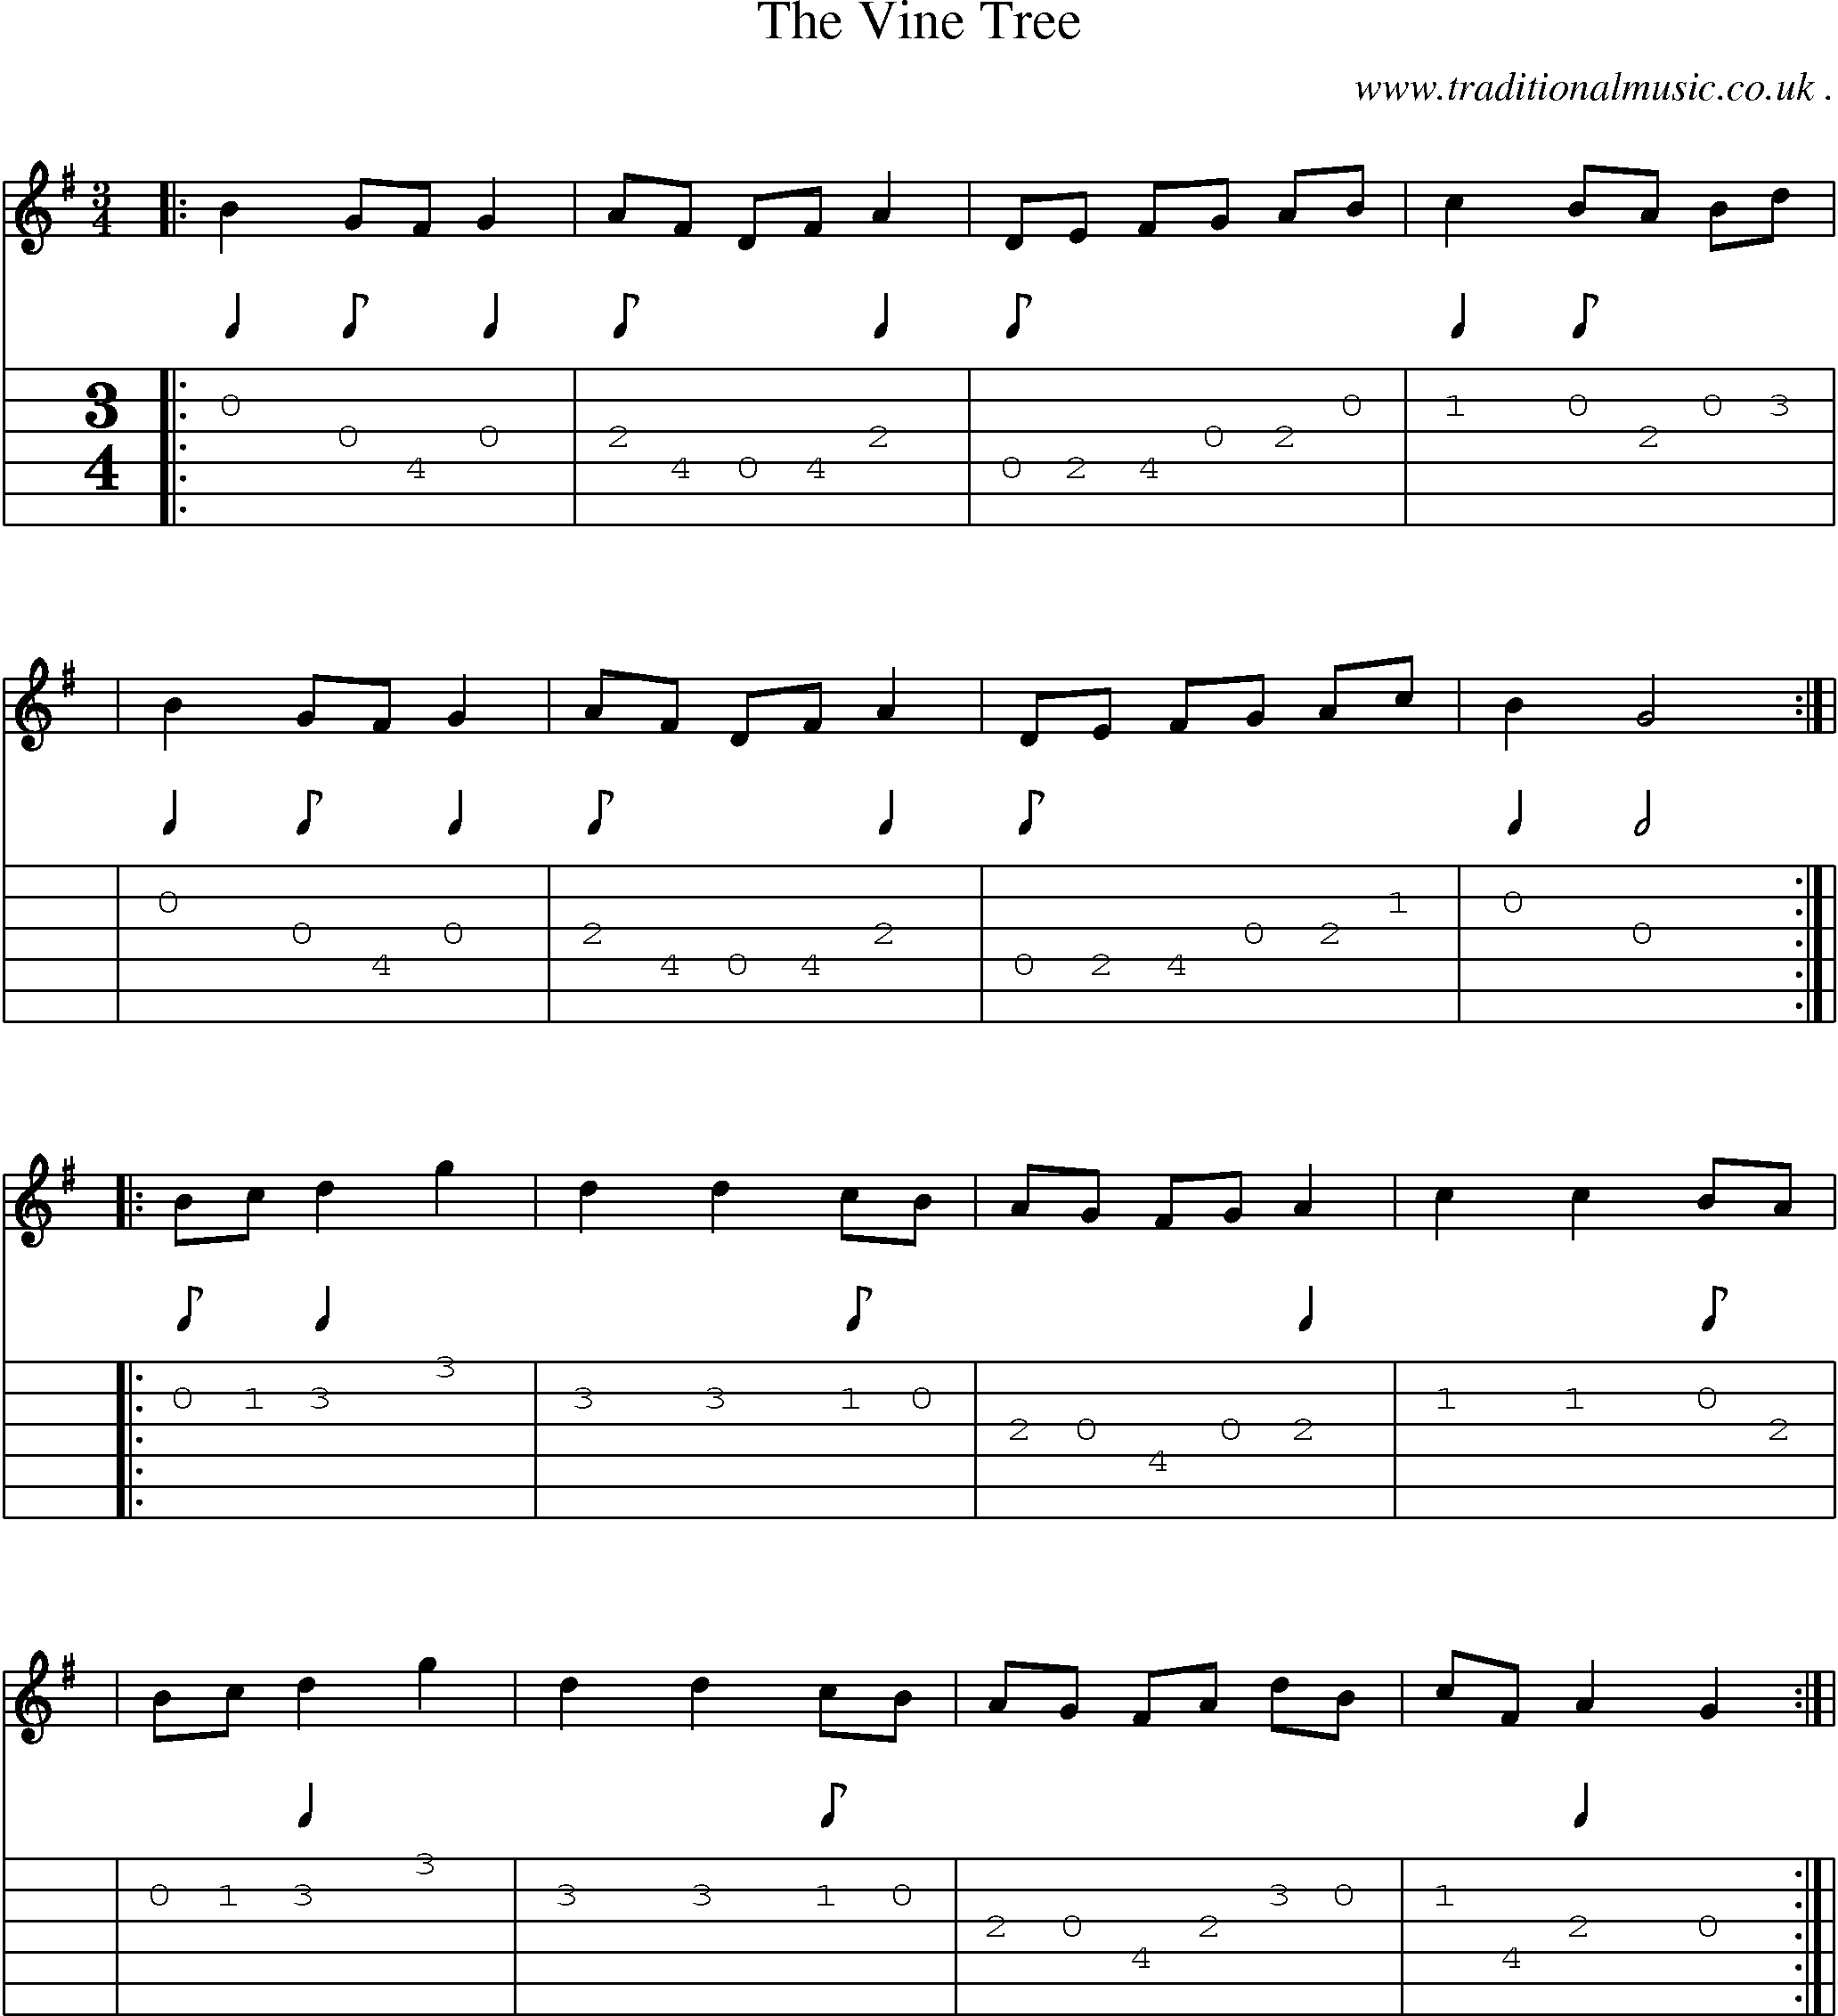 Sheet-Music and Guitar Tabs for The Vine Tree